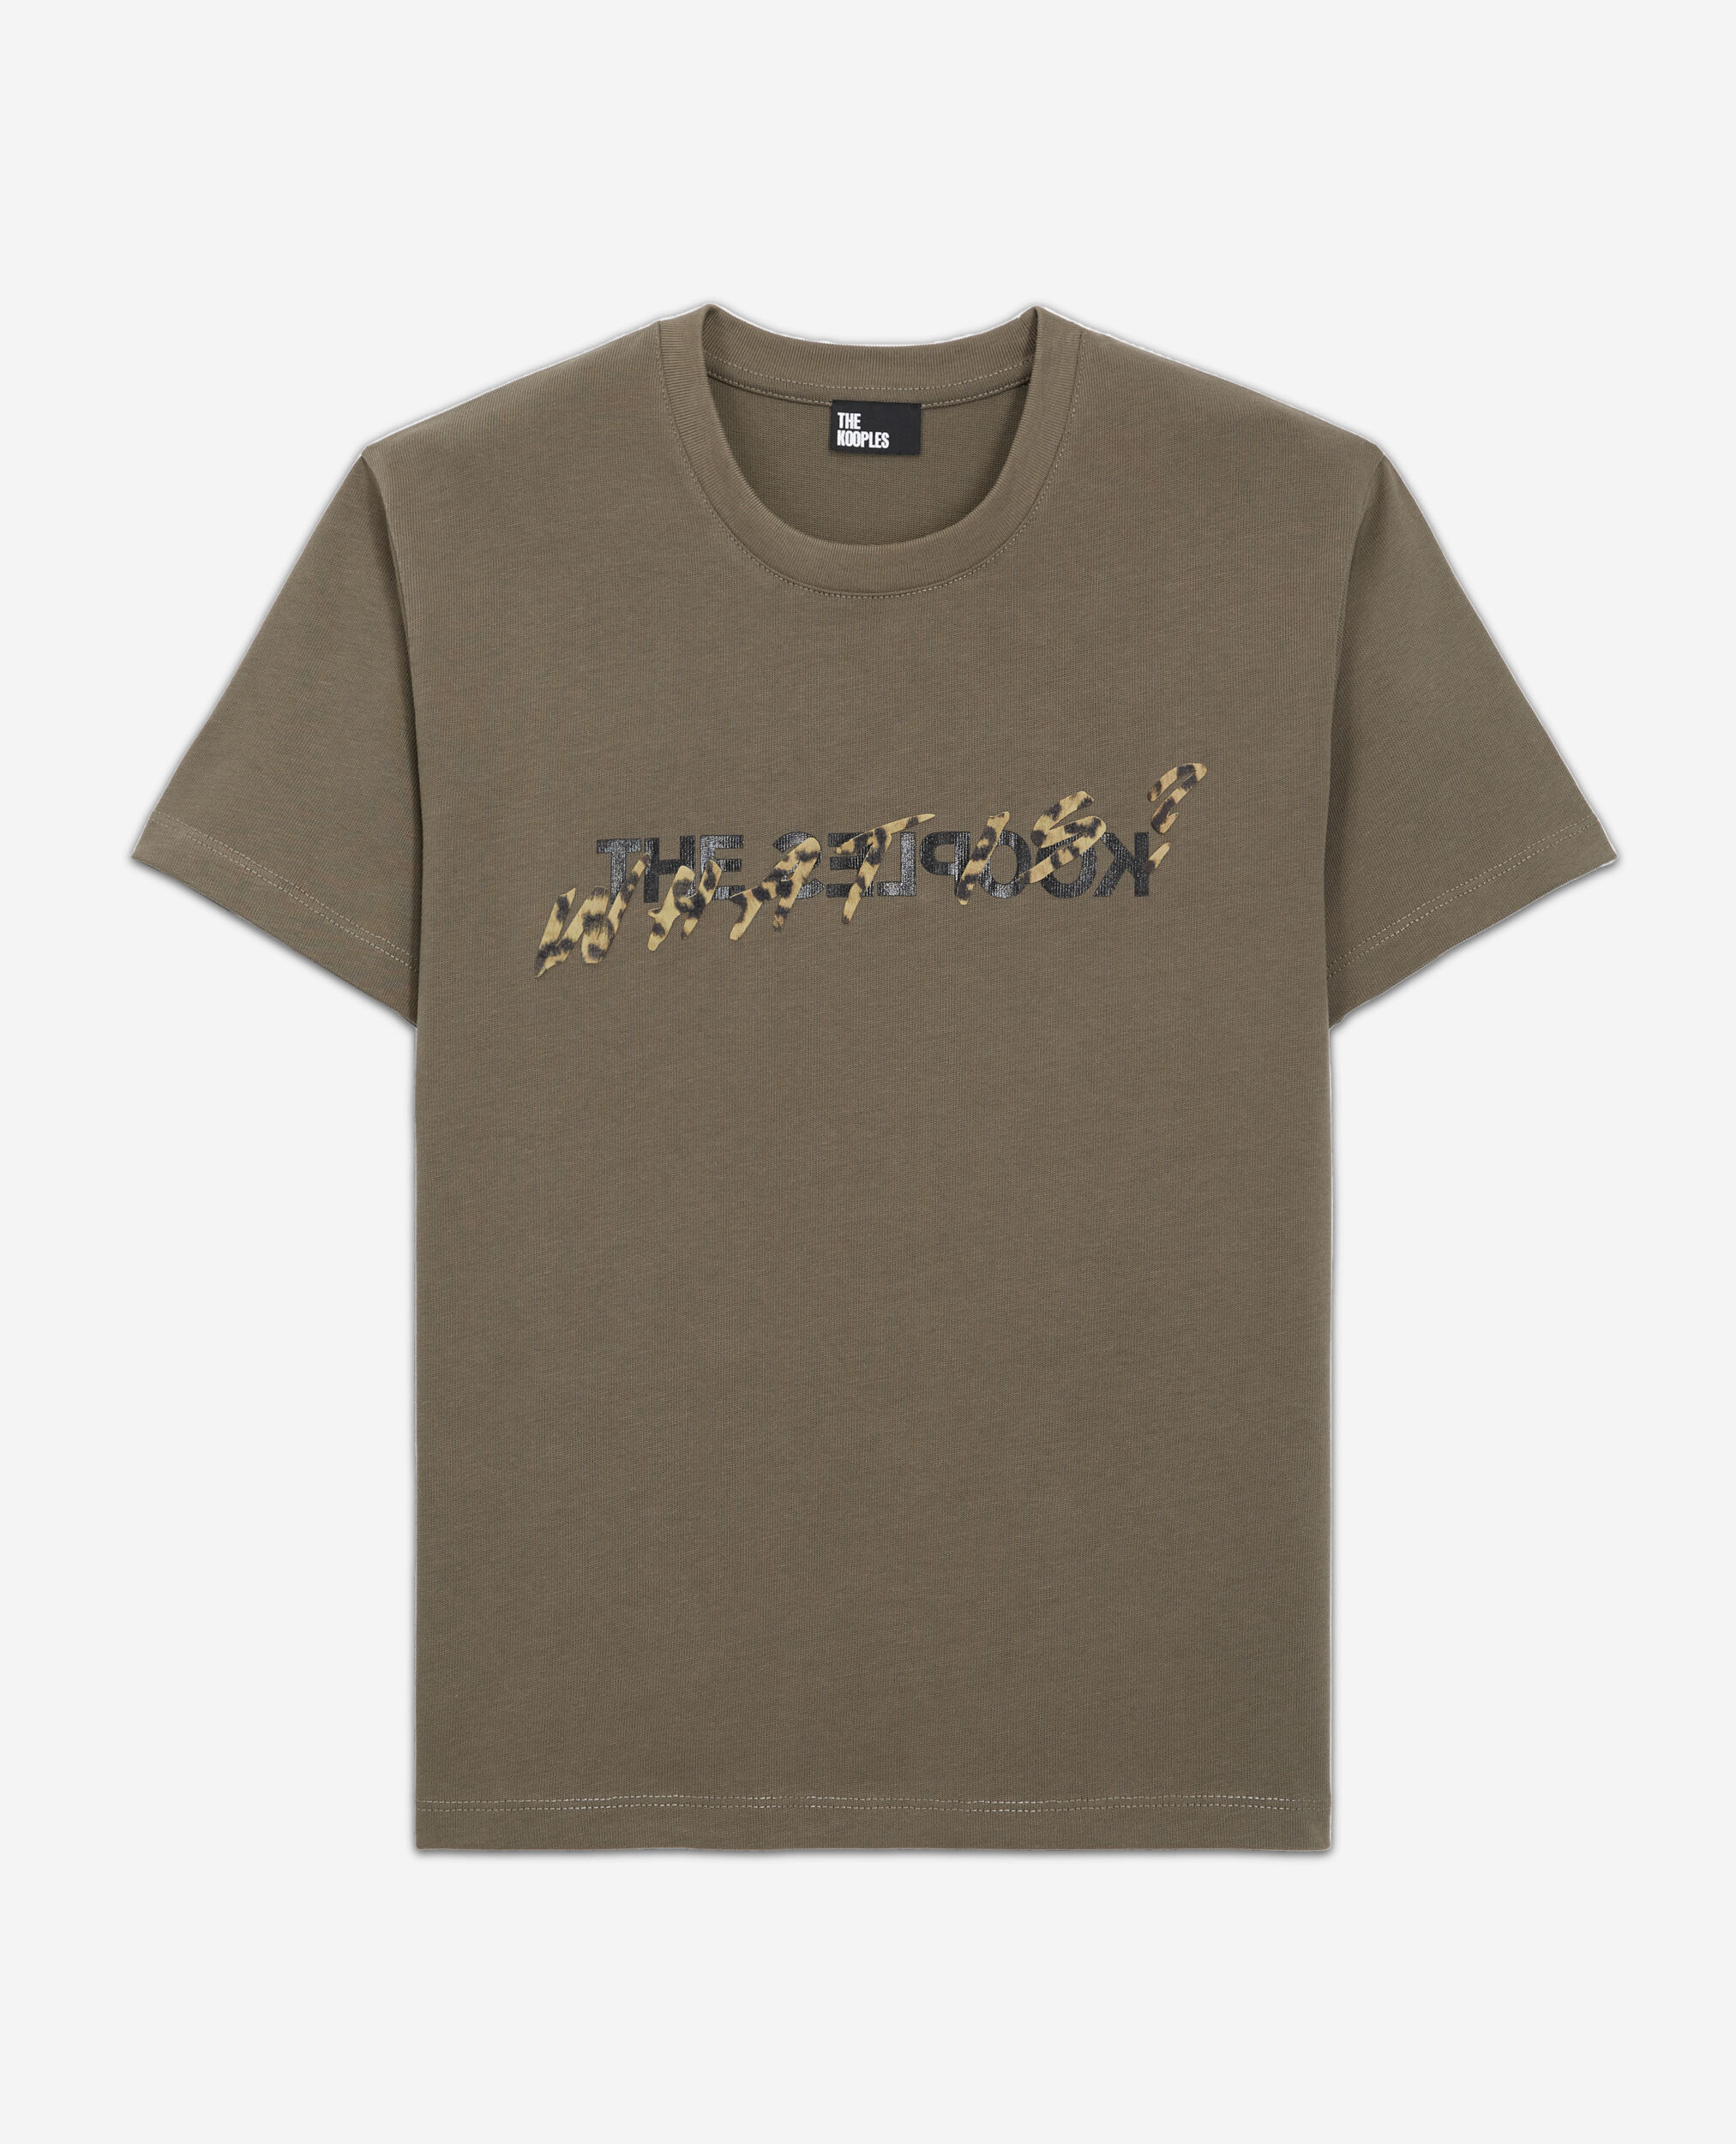 Women's khaki and leopard print what is t-shirt, ALGUE, hi-res image number null